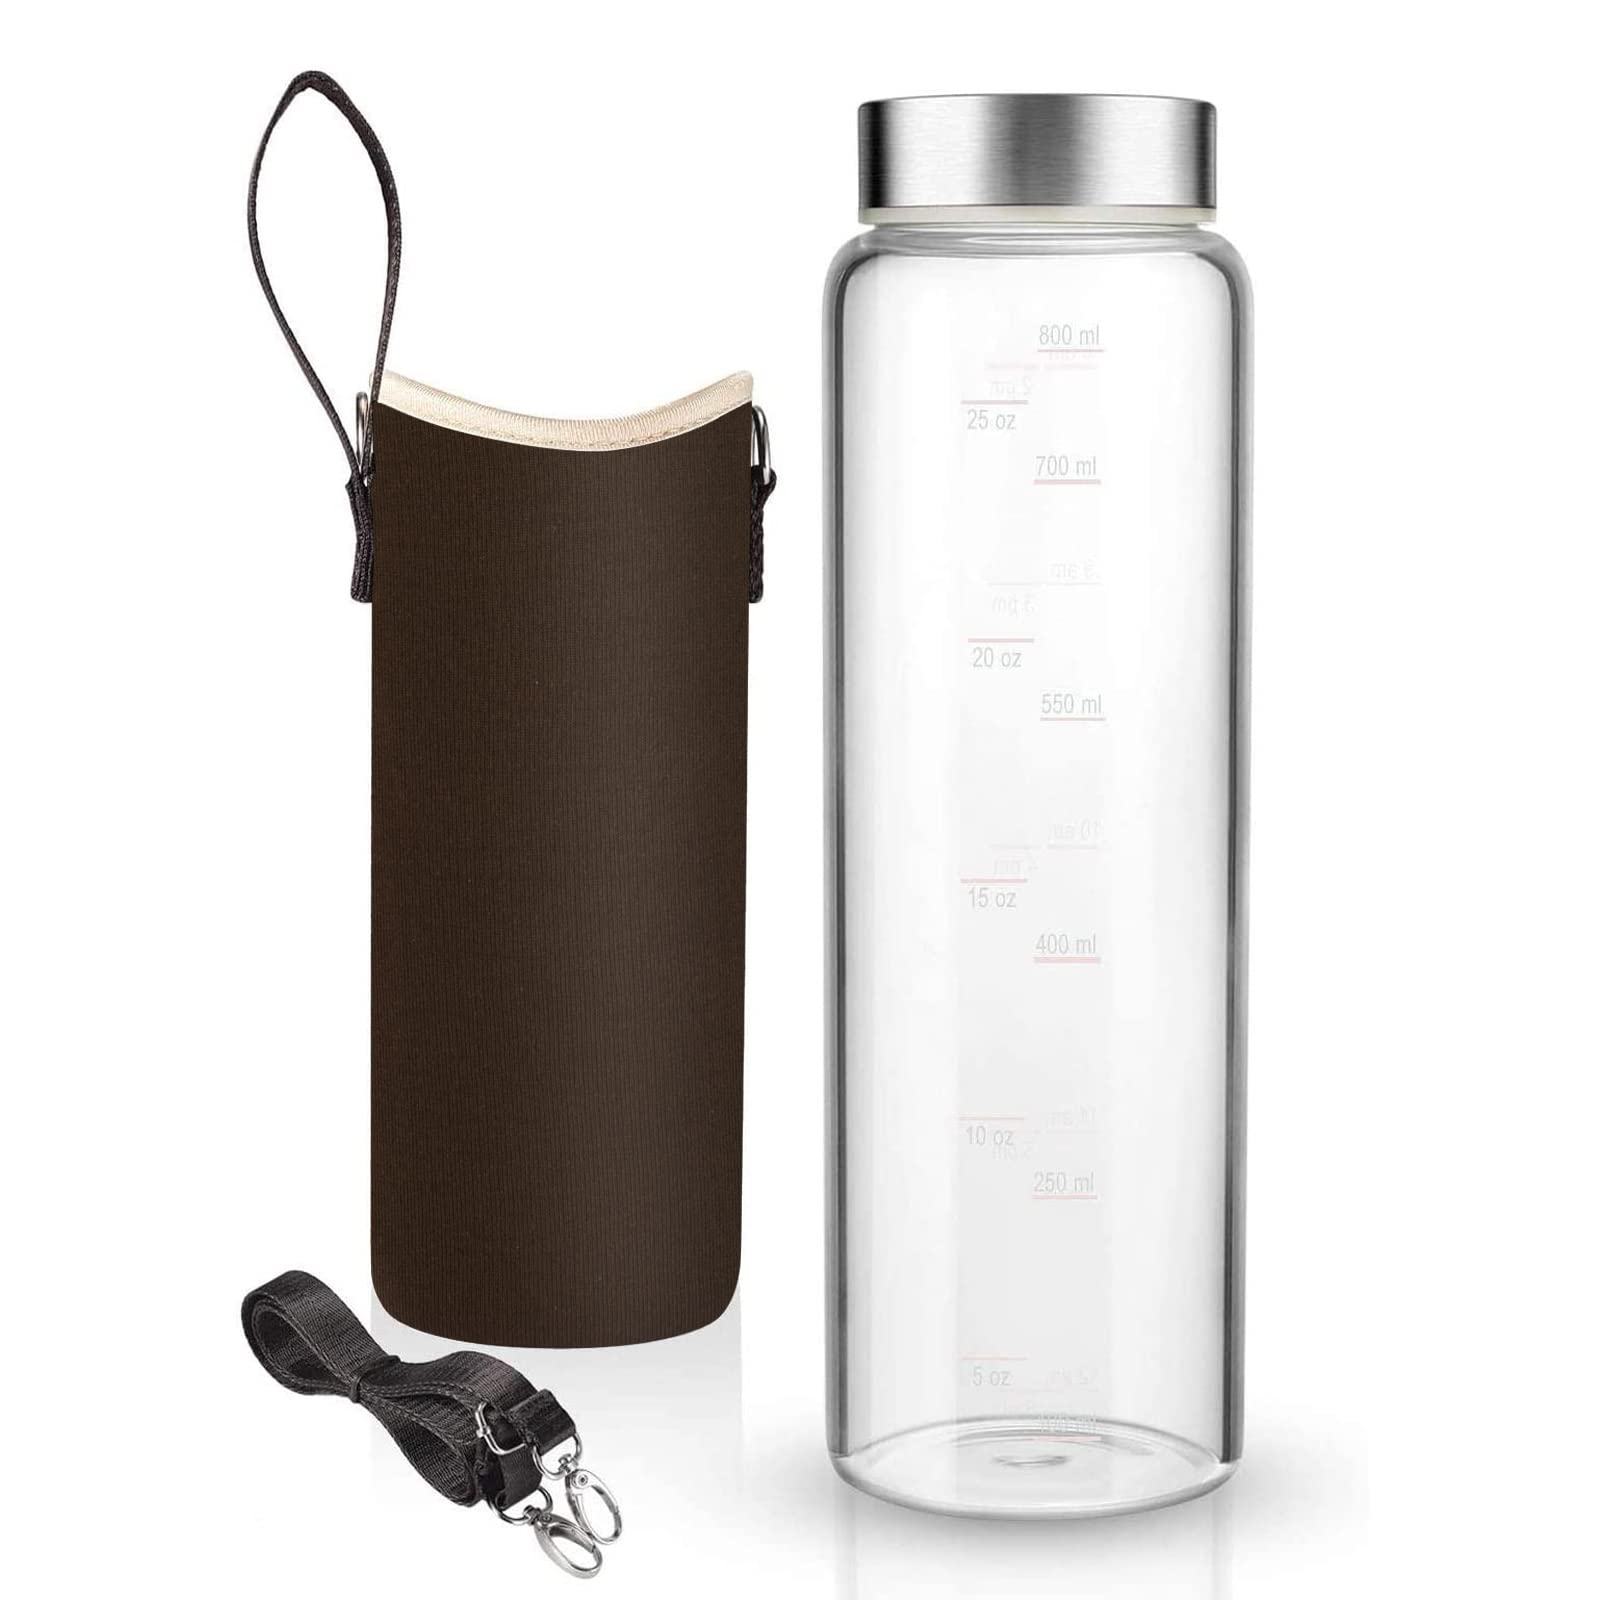 Sursip 32 oz Glass Water Bottle - Nylon Bottle Protection Sleeves, Stainless steel Lid, And 1L Time Marked Measurements, Reusabl